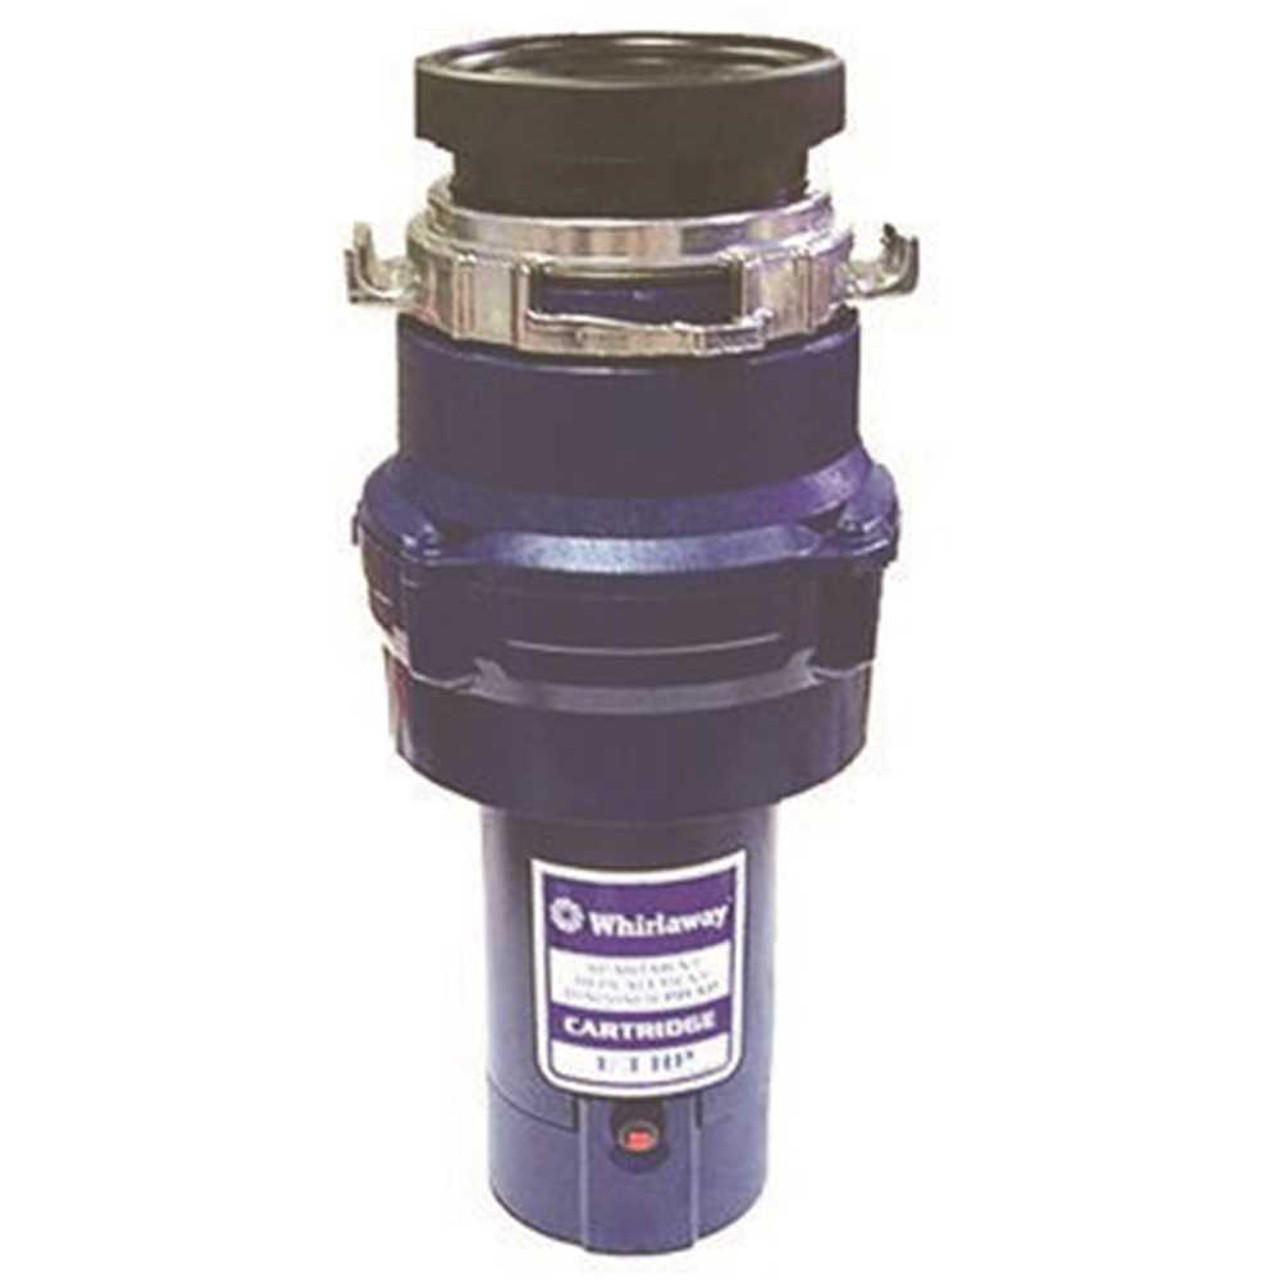 Whirlaway 191PC-AP 1/3 HP Continuous Feed Garbage Disposer